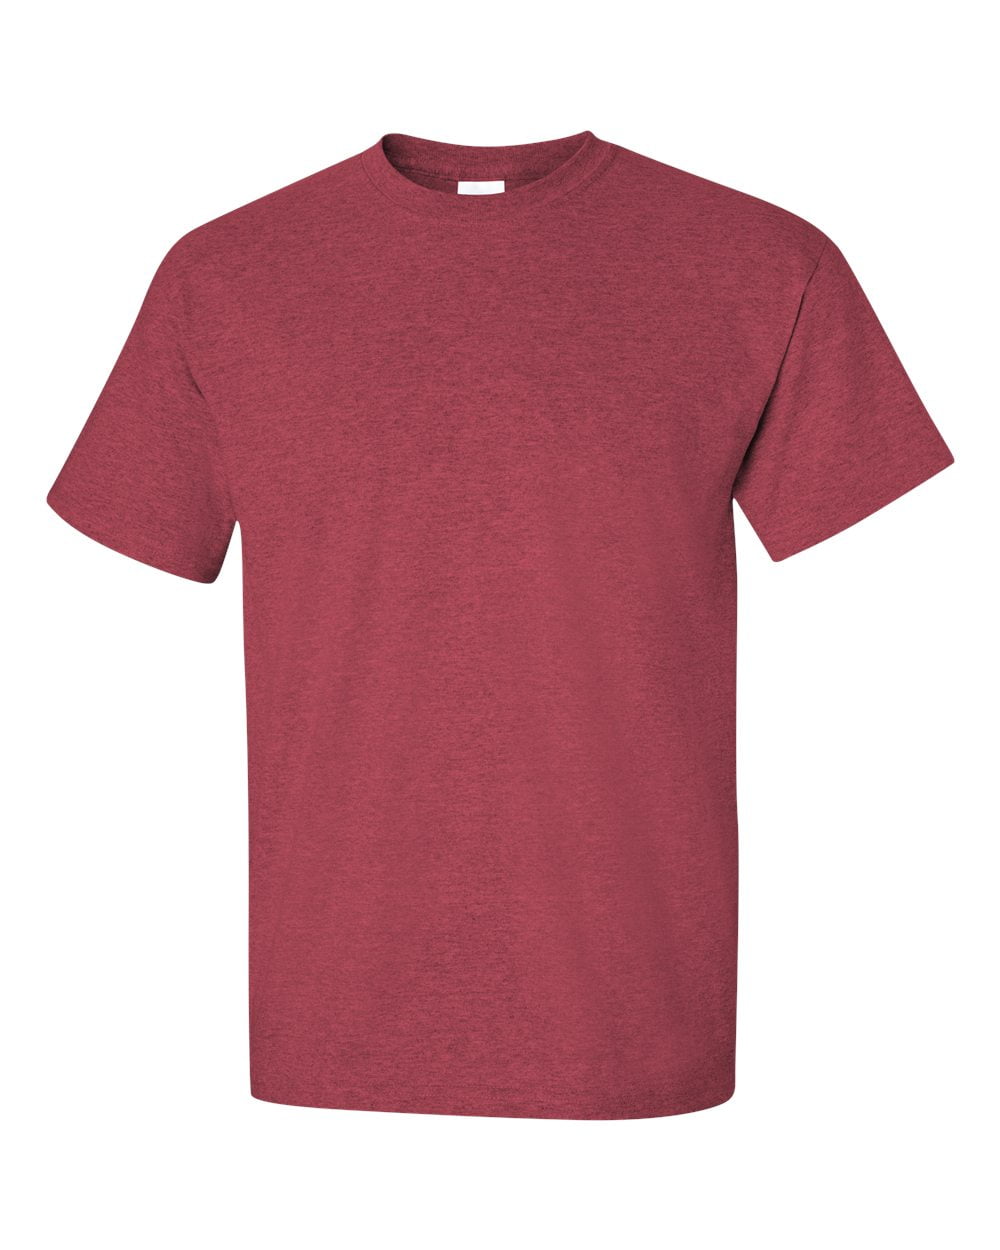 Gilden Gildan Ultra Cotton T-Shirt for Men and for Women Plain Classic Fit Size up to 5XL